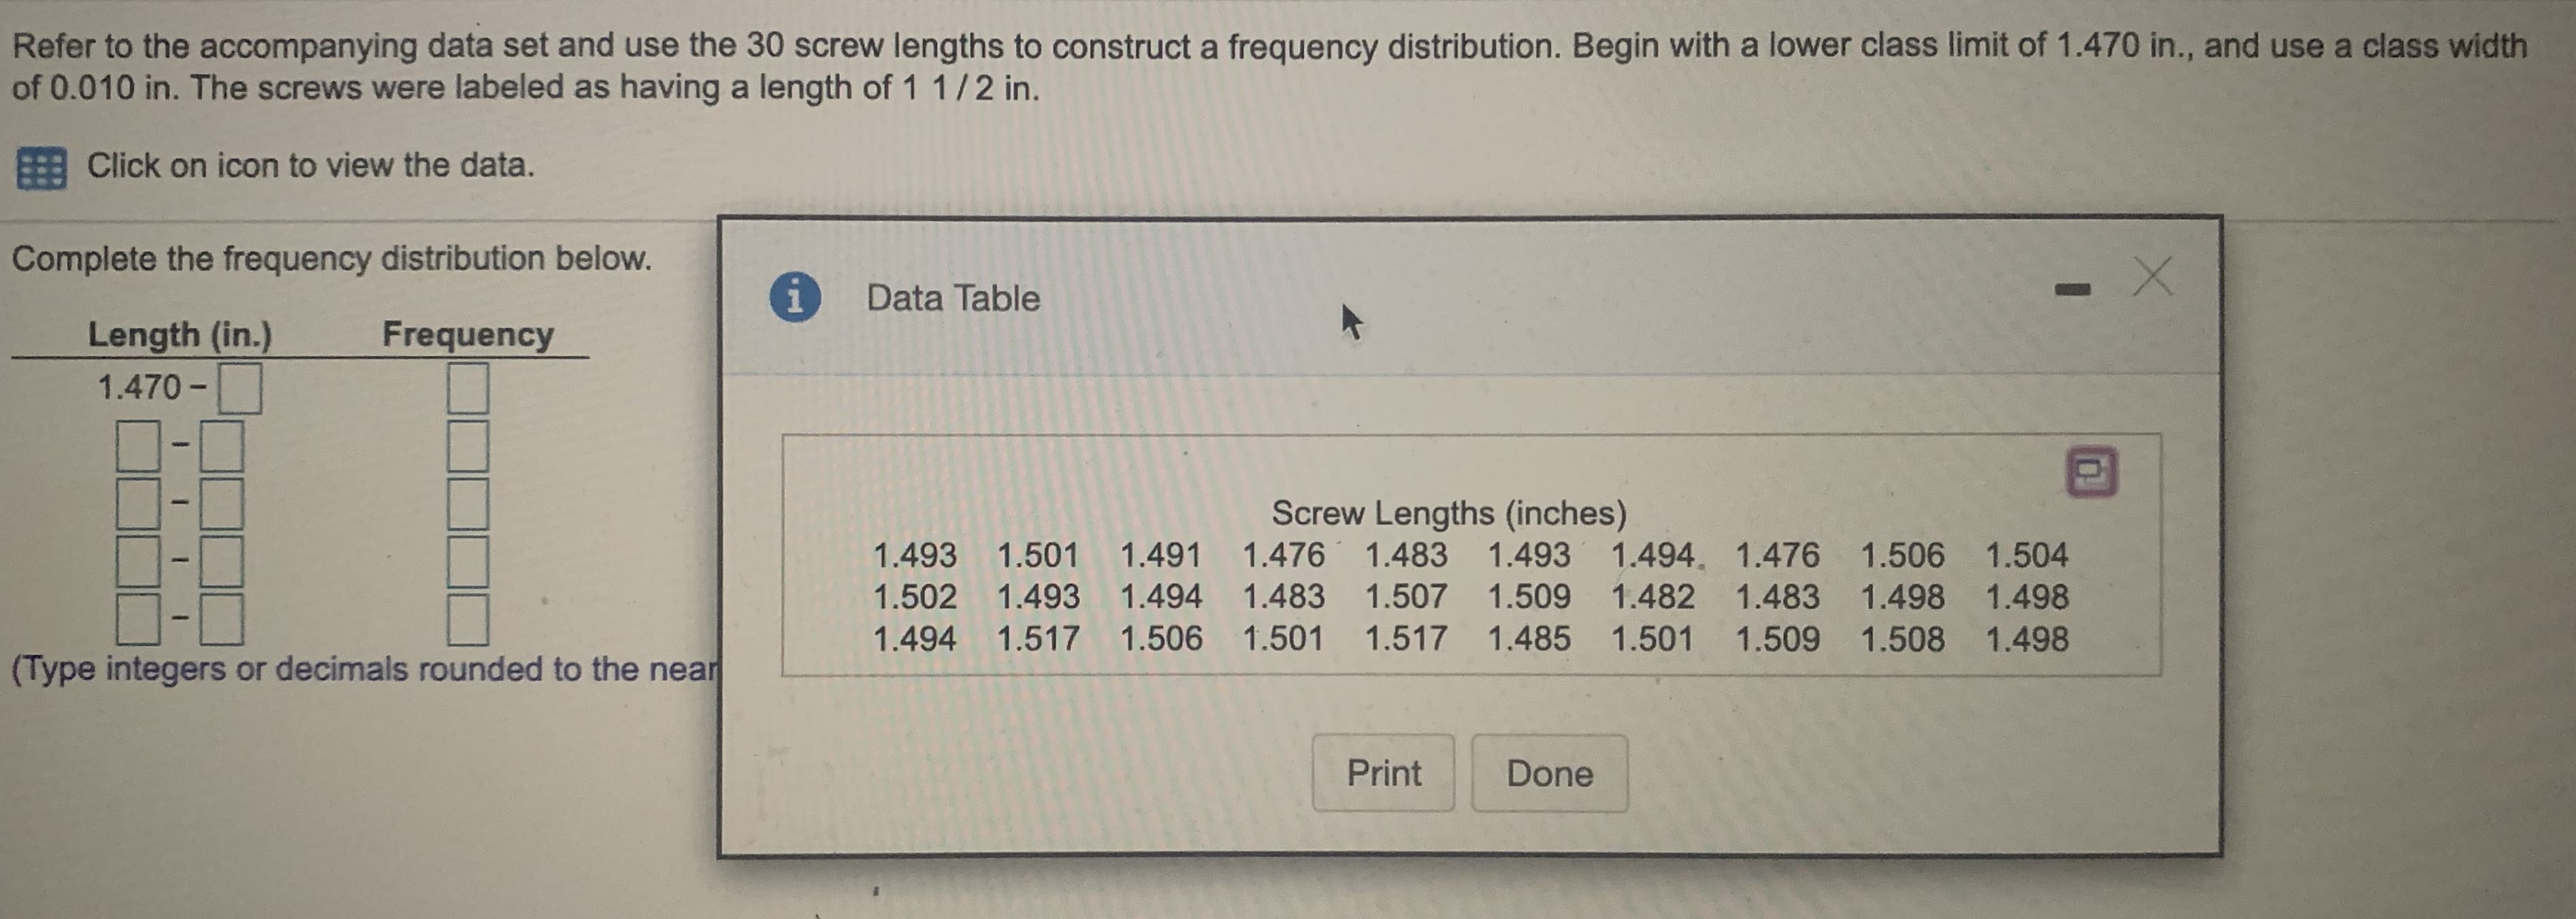 Refer to the accompanying data set and use the 30 screw lengths to construct a frequency distribution. Begin with a lower class limit of 1.470 in., and use a class width
of 0.010 in. The screws were labeled as having a length of 1 1/2 in.
E Click on icon to view the data.
Complete the frequency distribution below.
Data Table
Length (in.)
Frequency
1.470 -
Screw Lengths (inches)
1.493 1.501
1.491 1.476 1.483 1.493 1.494. 1.476 1.506 1.504
1.502 1.493 1.494 1.483 1.507 1.509 1.482 1.483 1.498 1.498
1.494
1.517 1.506
1.501
1.517 1.485 1.501
1.509 1.508 1.498
(Type integers or decimals rounded to the near
%D
